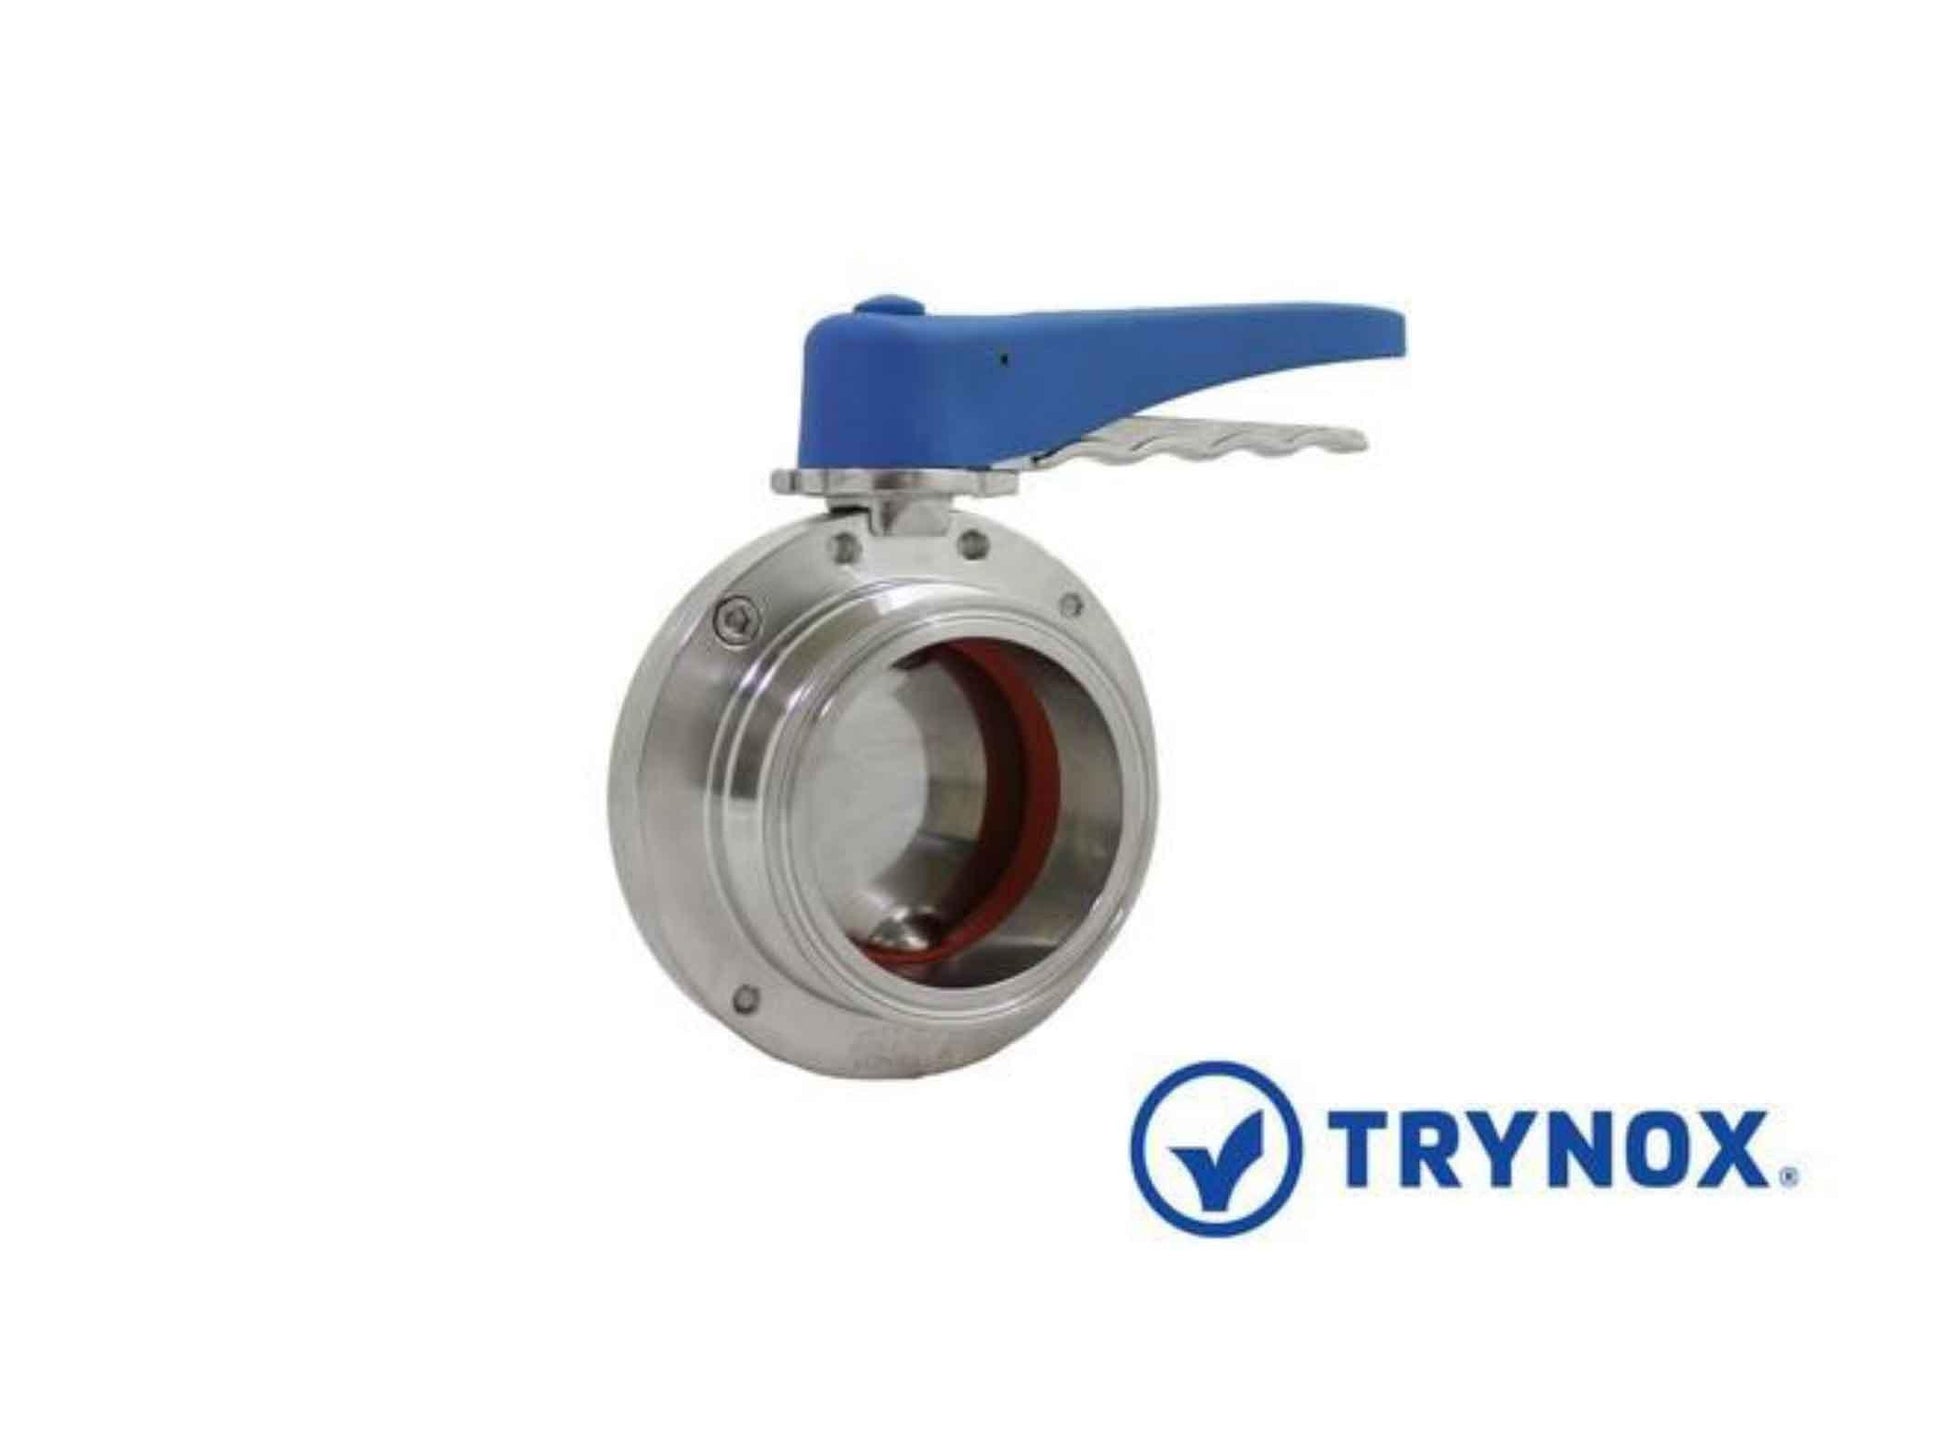 Trynox Sanitary Butterfly Valve Clamp Ends - SC Filtration